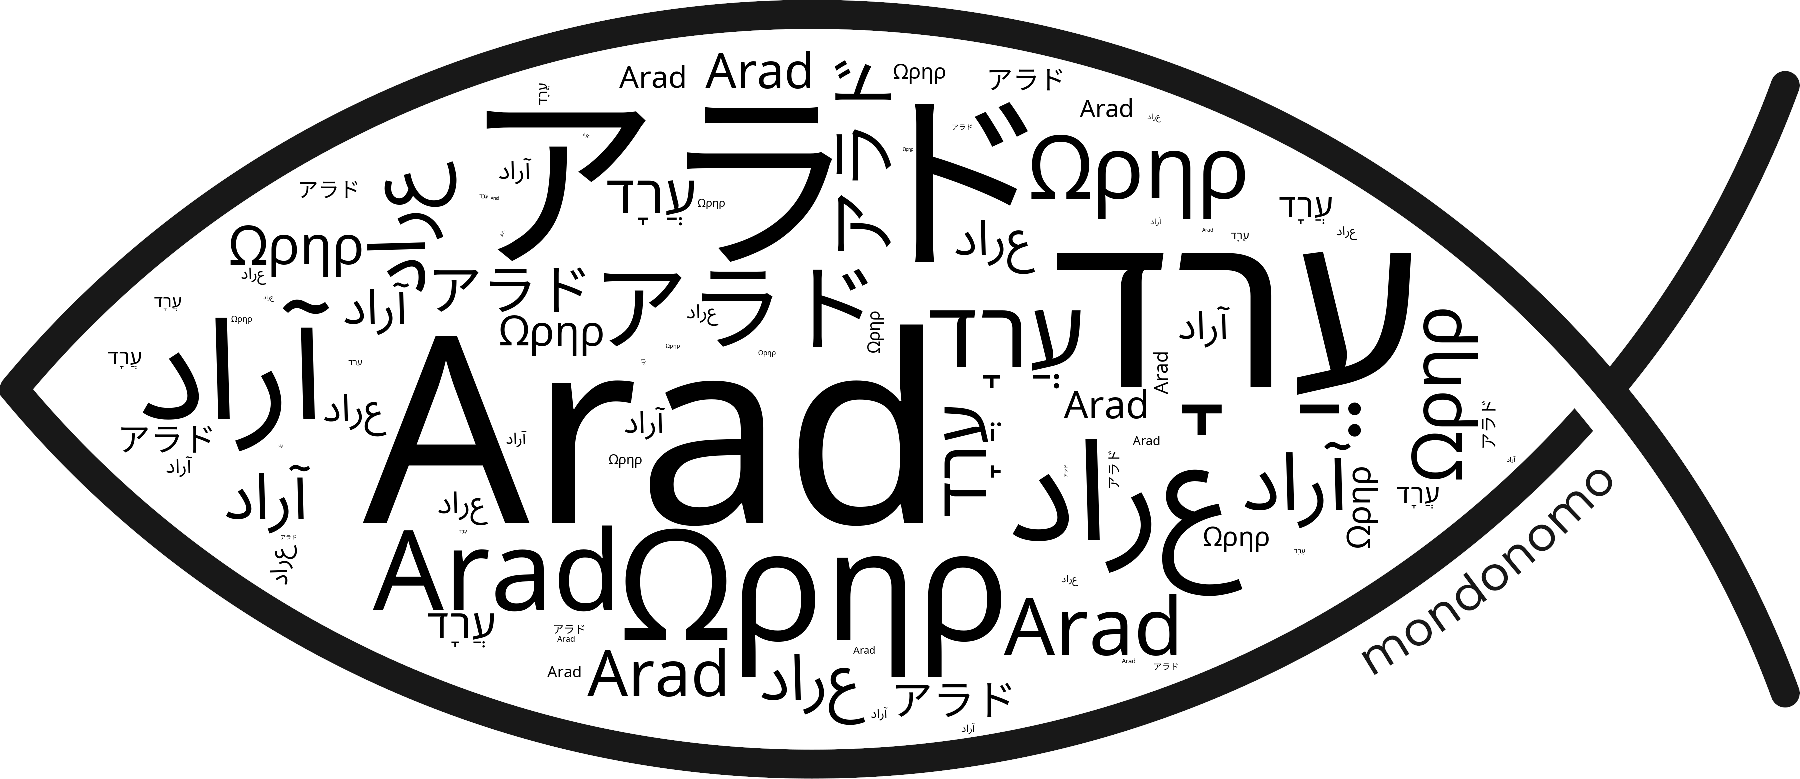 Name Arad in the world's Bibles